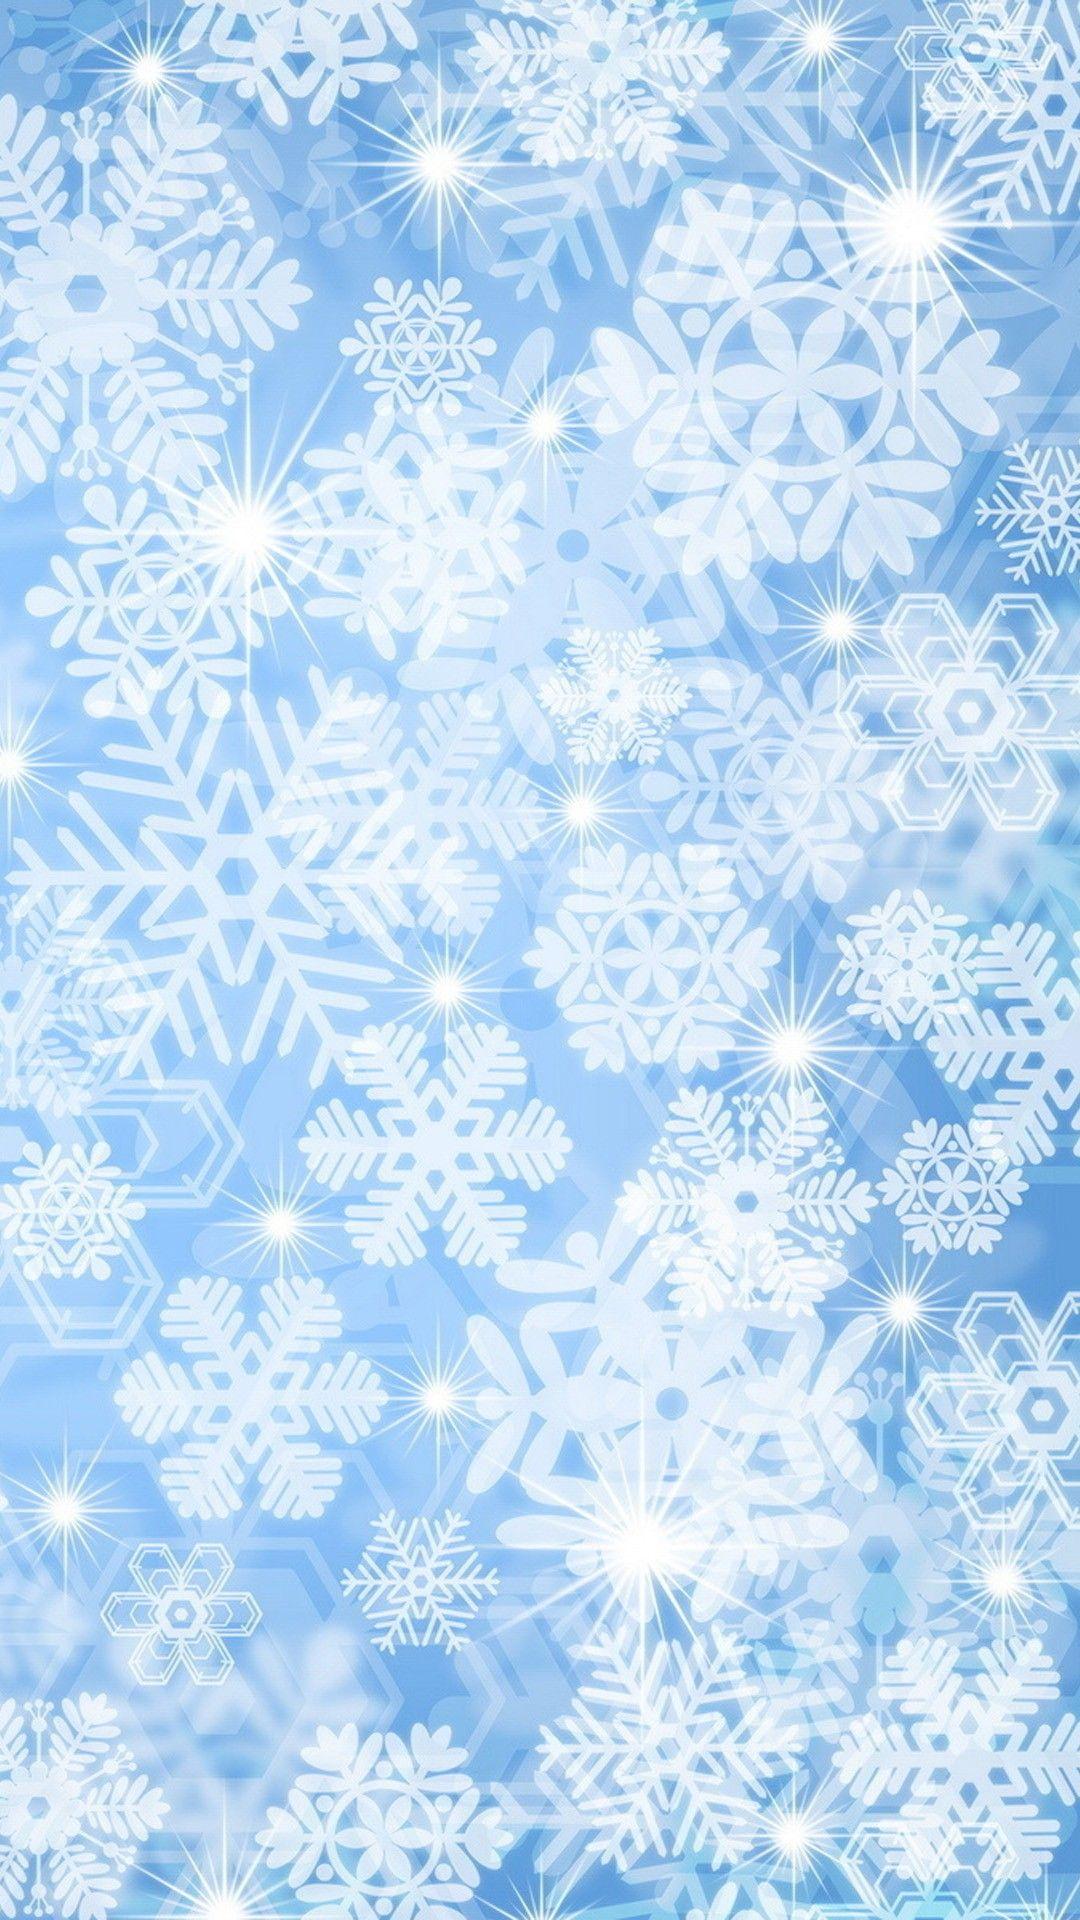 Christmas snowflakes and stars iPhone 6 plus wallpaper. Cute